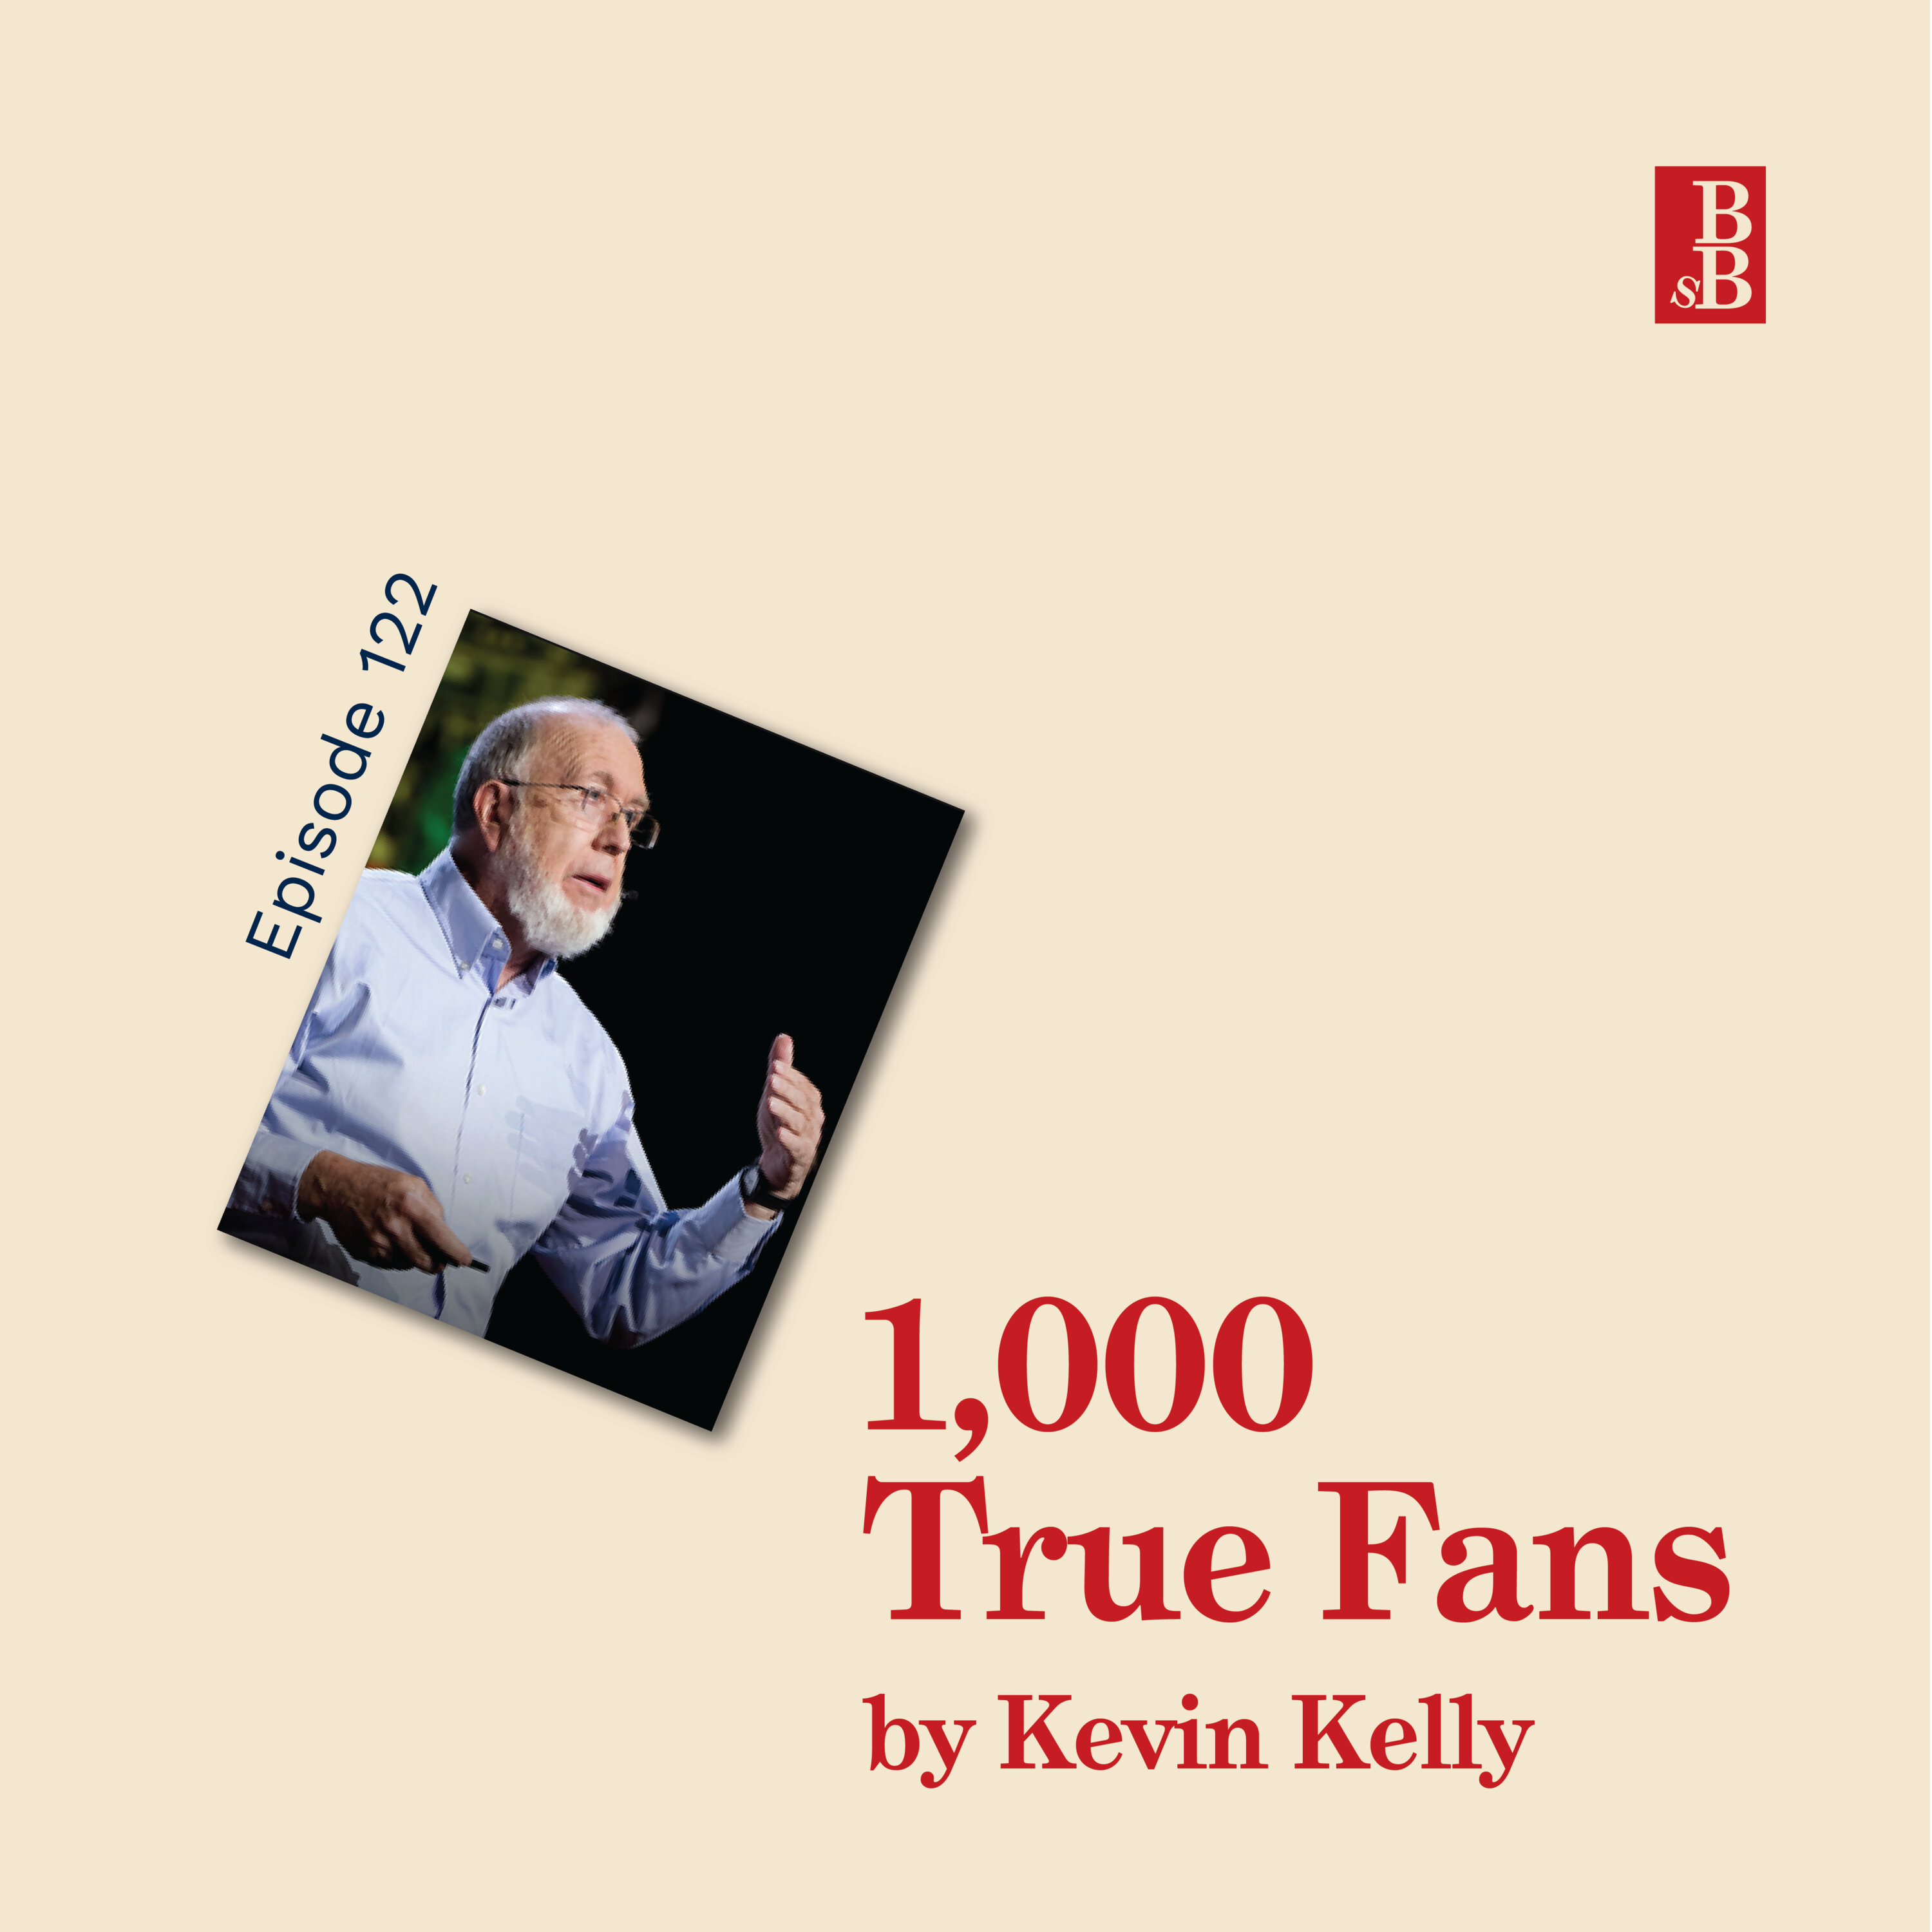 1,000 True Fans by Kevin Kelly - why you shouldn't focus on the millions Image